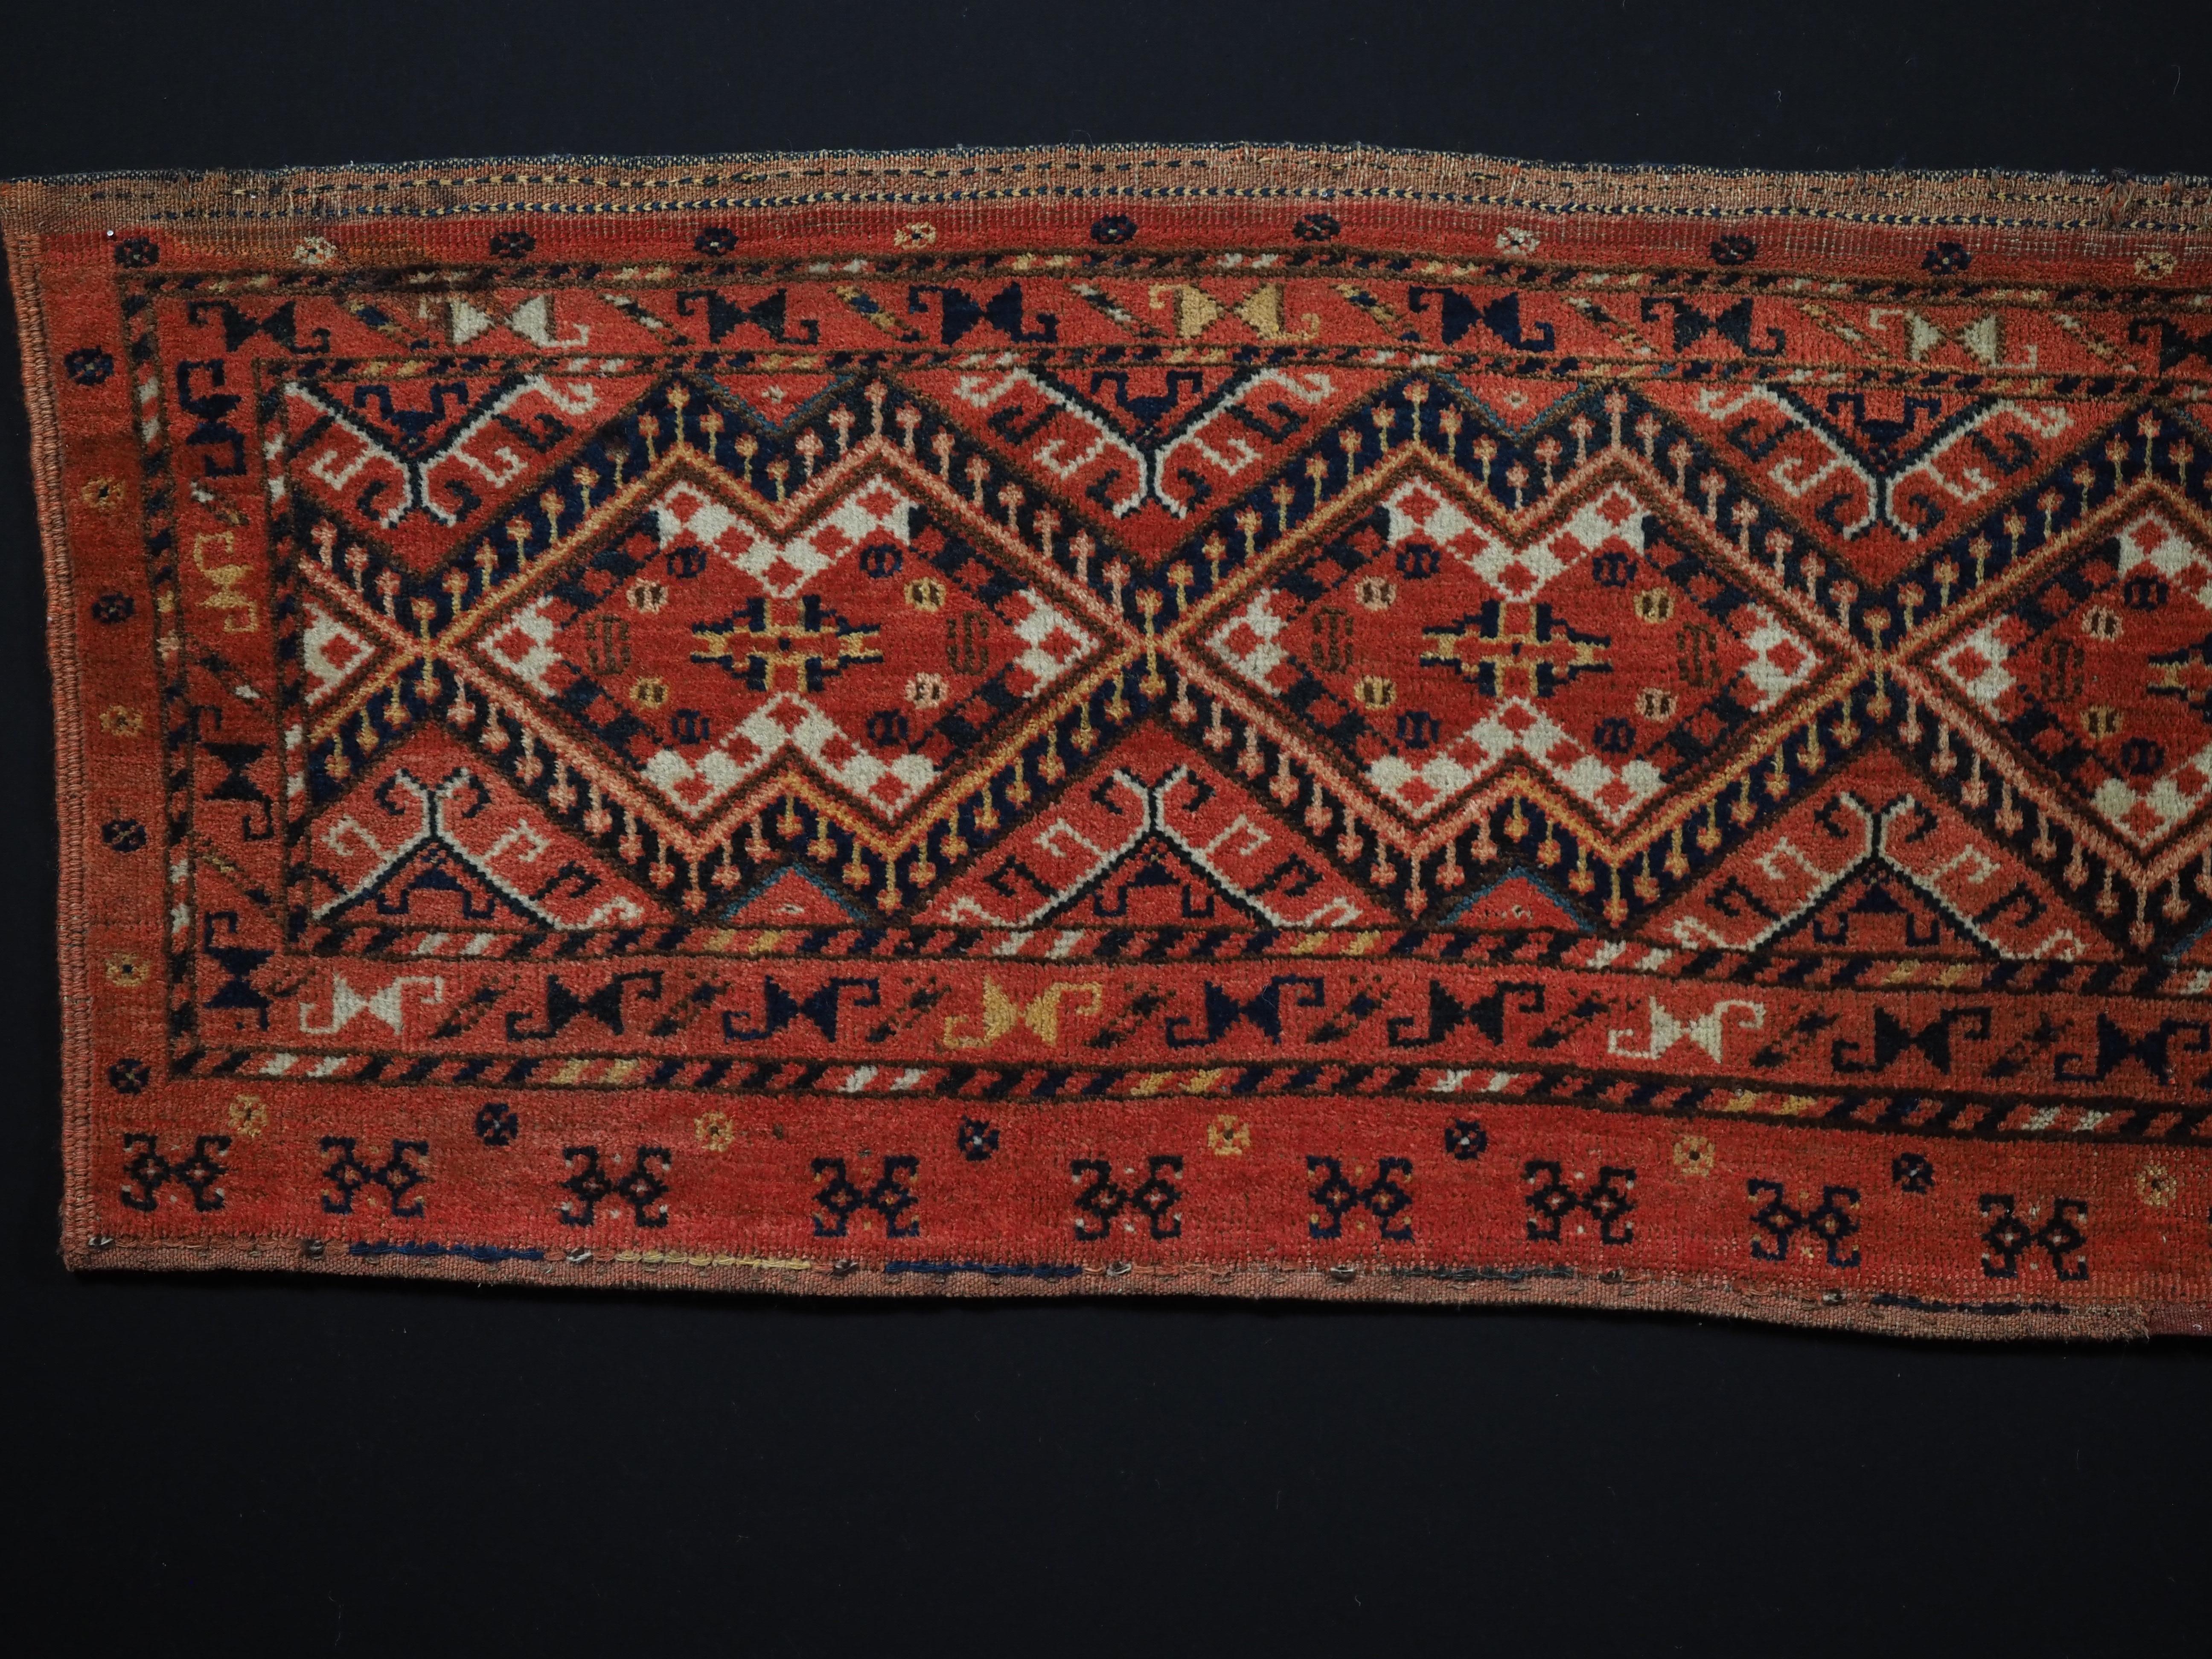 Size: 5ft 7in x 1ft 6in (170 x 46cm)

Antique Ersari Beshir Turkmen torba with ikat design.

Circa 1890.

Torba are shallow wall bags used mainly in tents or yurts for the storage of personal belongings, they were also used to decorate the sides of